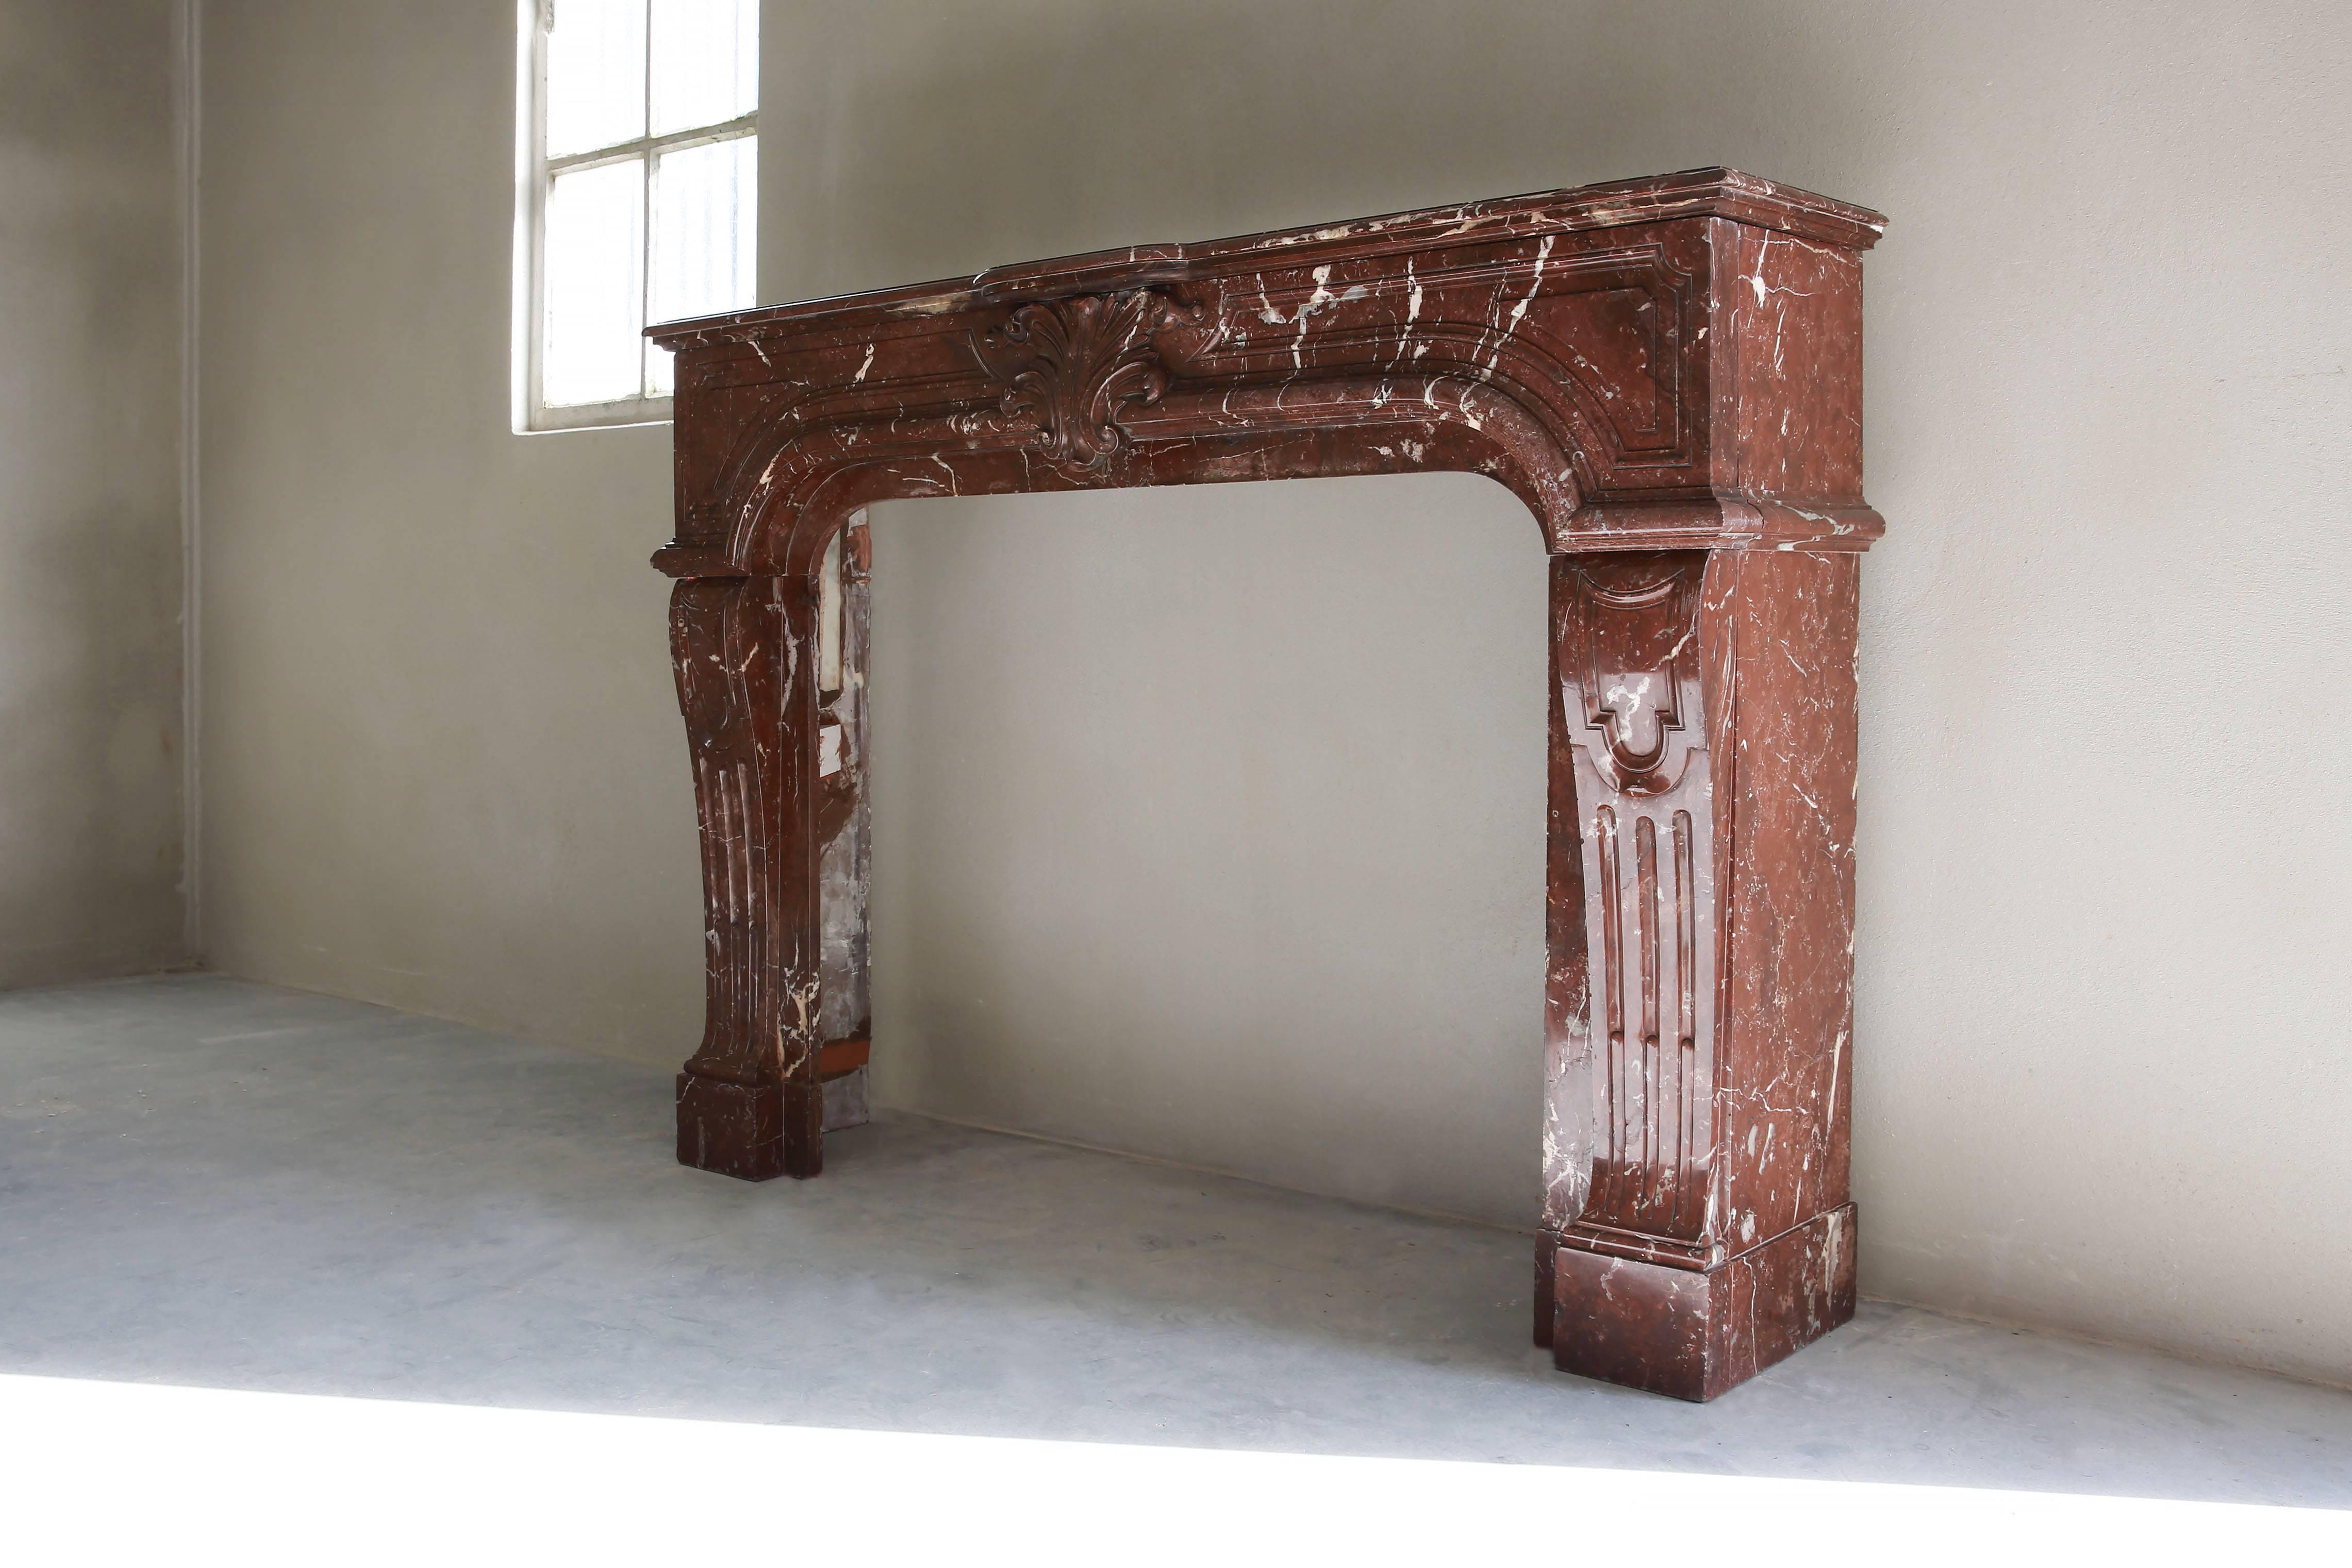 A very special and exclusive antique marble fireplace of Griotte Rouge from Belgique. This fireplace has a very warm and excellent appearance in the style of Louis XIV.